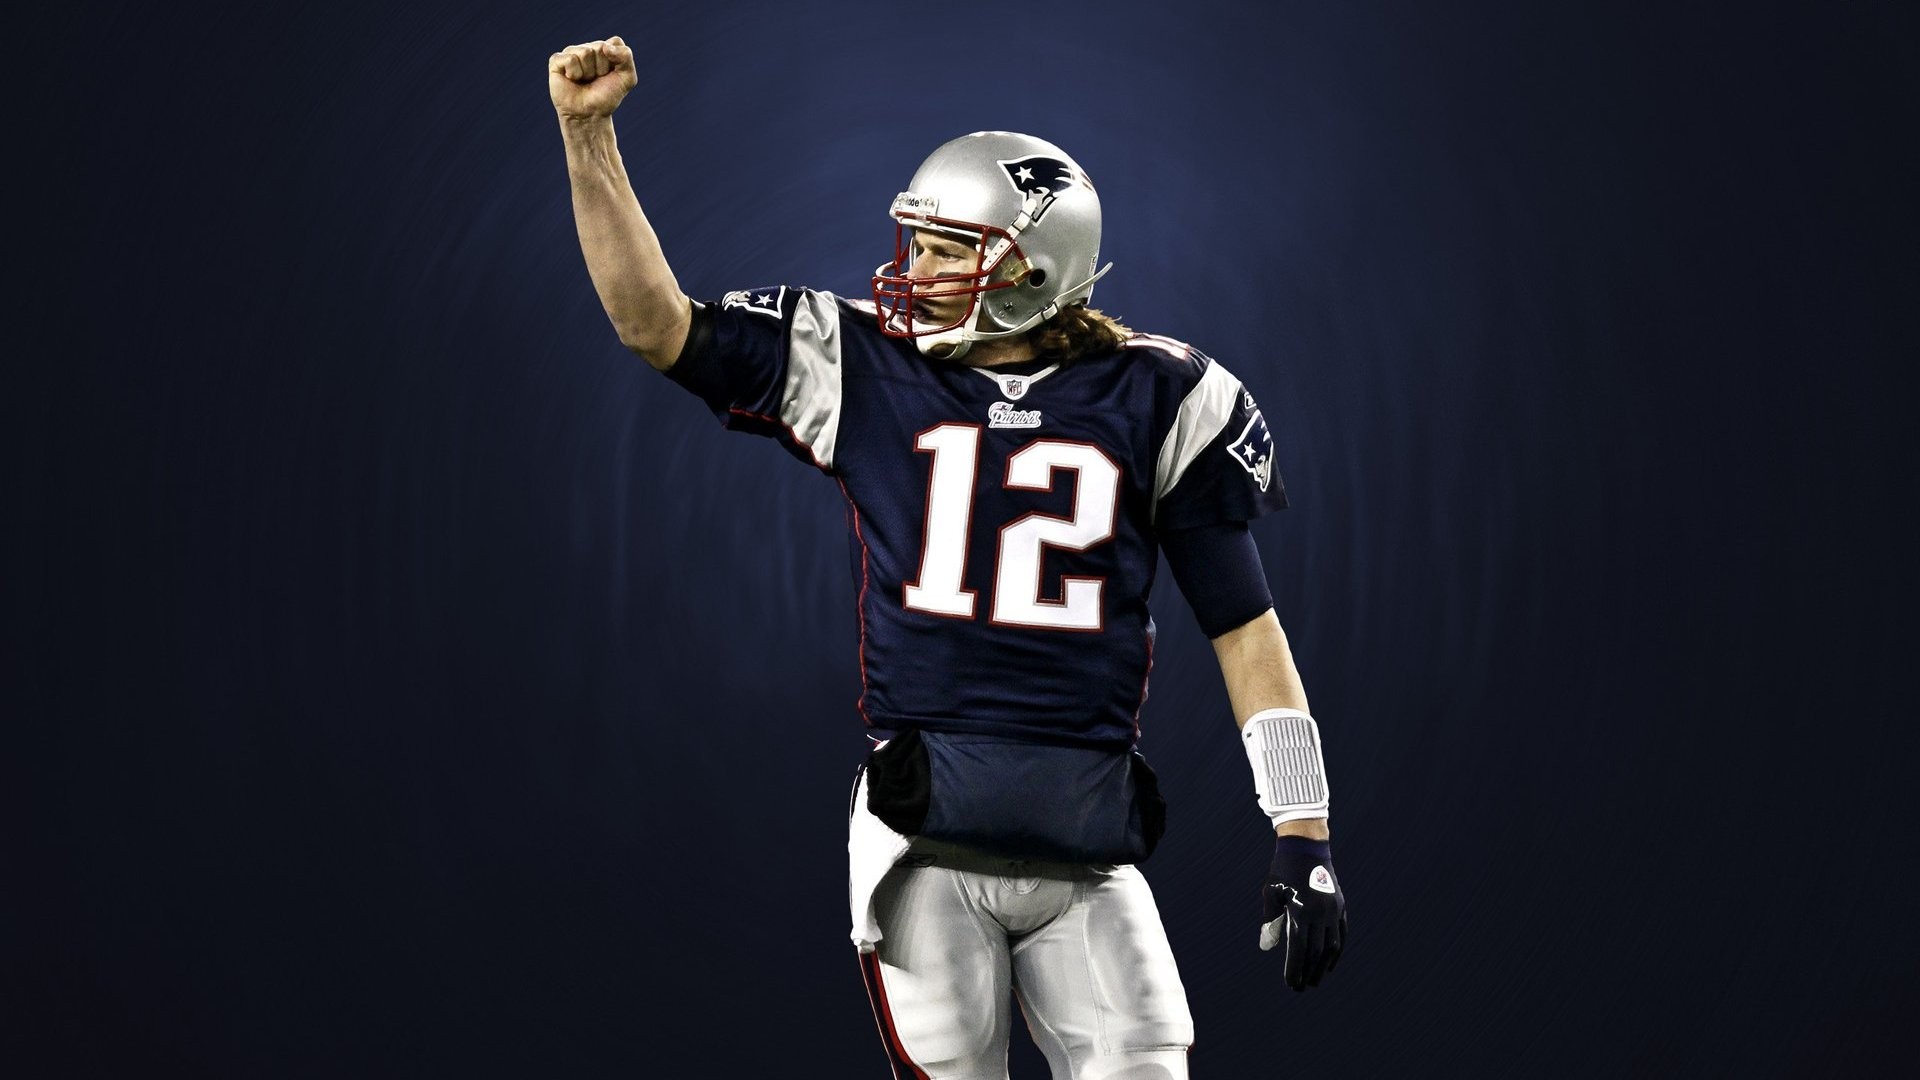 Tom Brady Super Bowl Wallpaper with resolution 1920X1080 pixel. You can use this wallpaper as background for your desktop Computer Screensavers, Android or iPhone smartphones